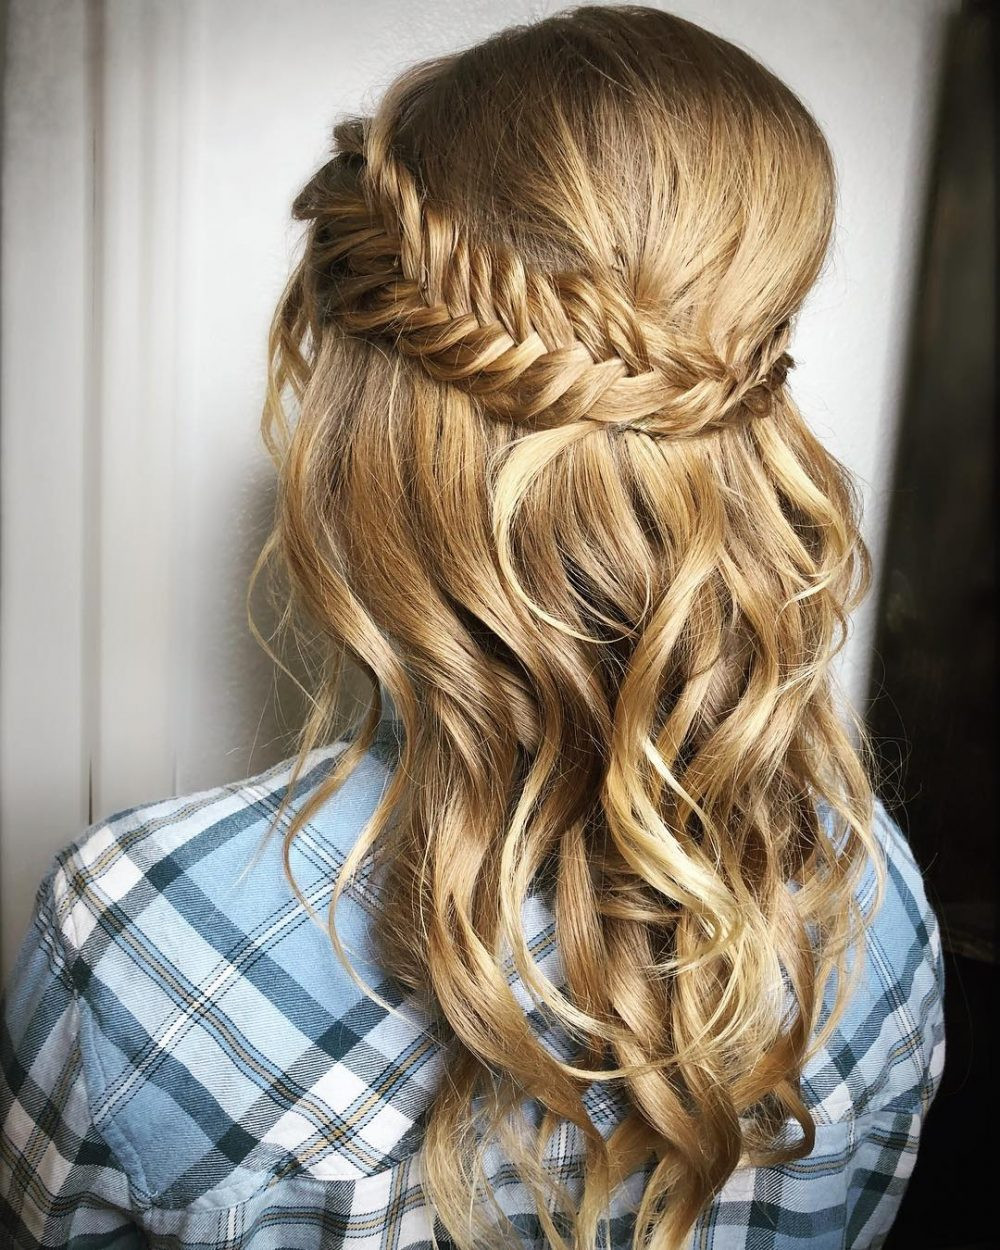 Prom Hairstyles Half Updos
 Half Up Half Down Prom Hairstyles and How To s